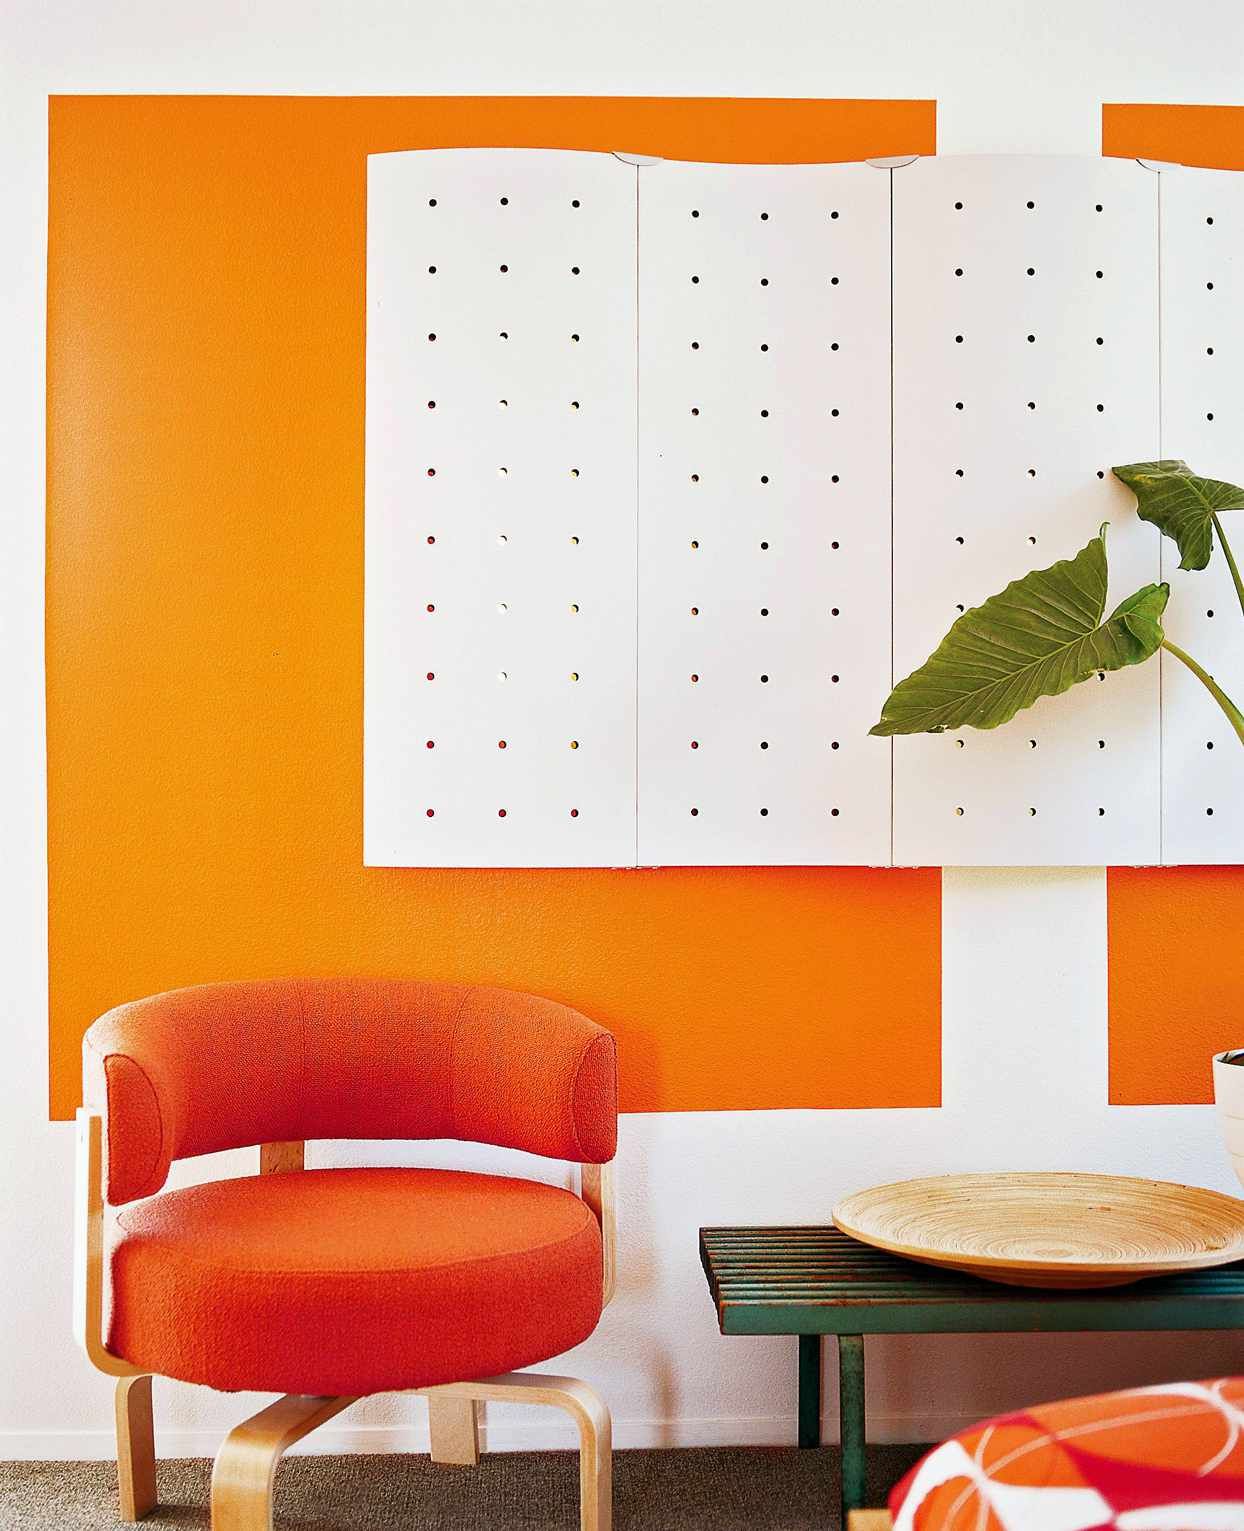 9 Creative Ways To Add Color Block Walls To Your Interior Design Intended For Color Block Wall Art (View 9 of 15)